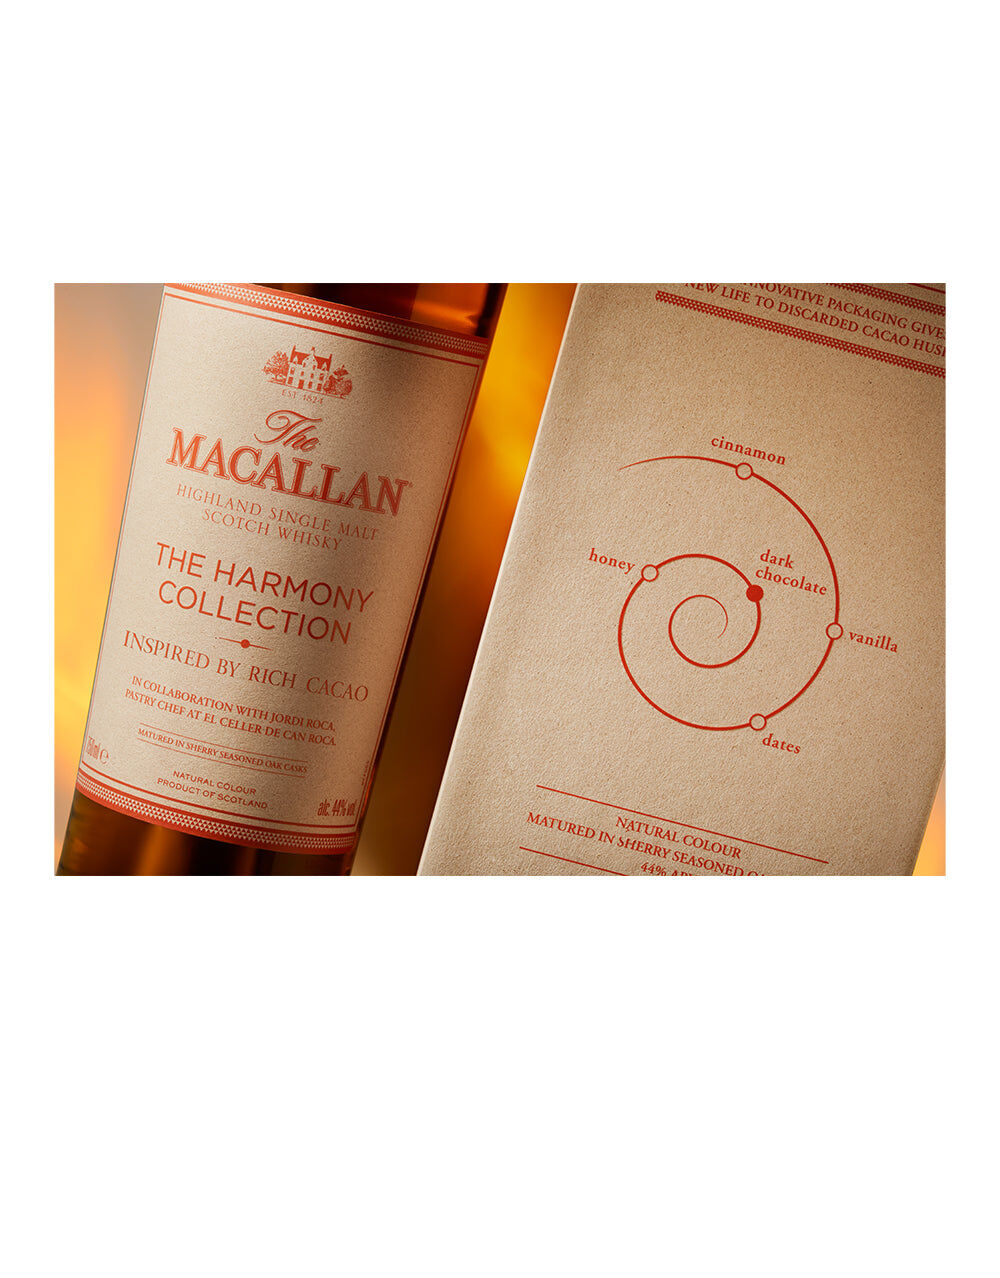 The Macallan Harmony Collection: Rich Cacao, , main_image_2